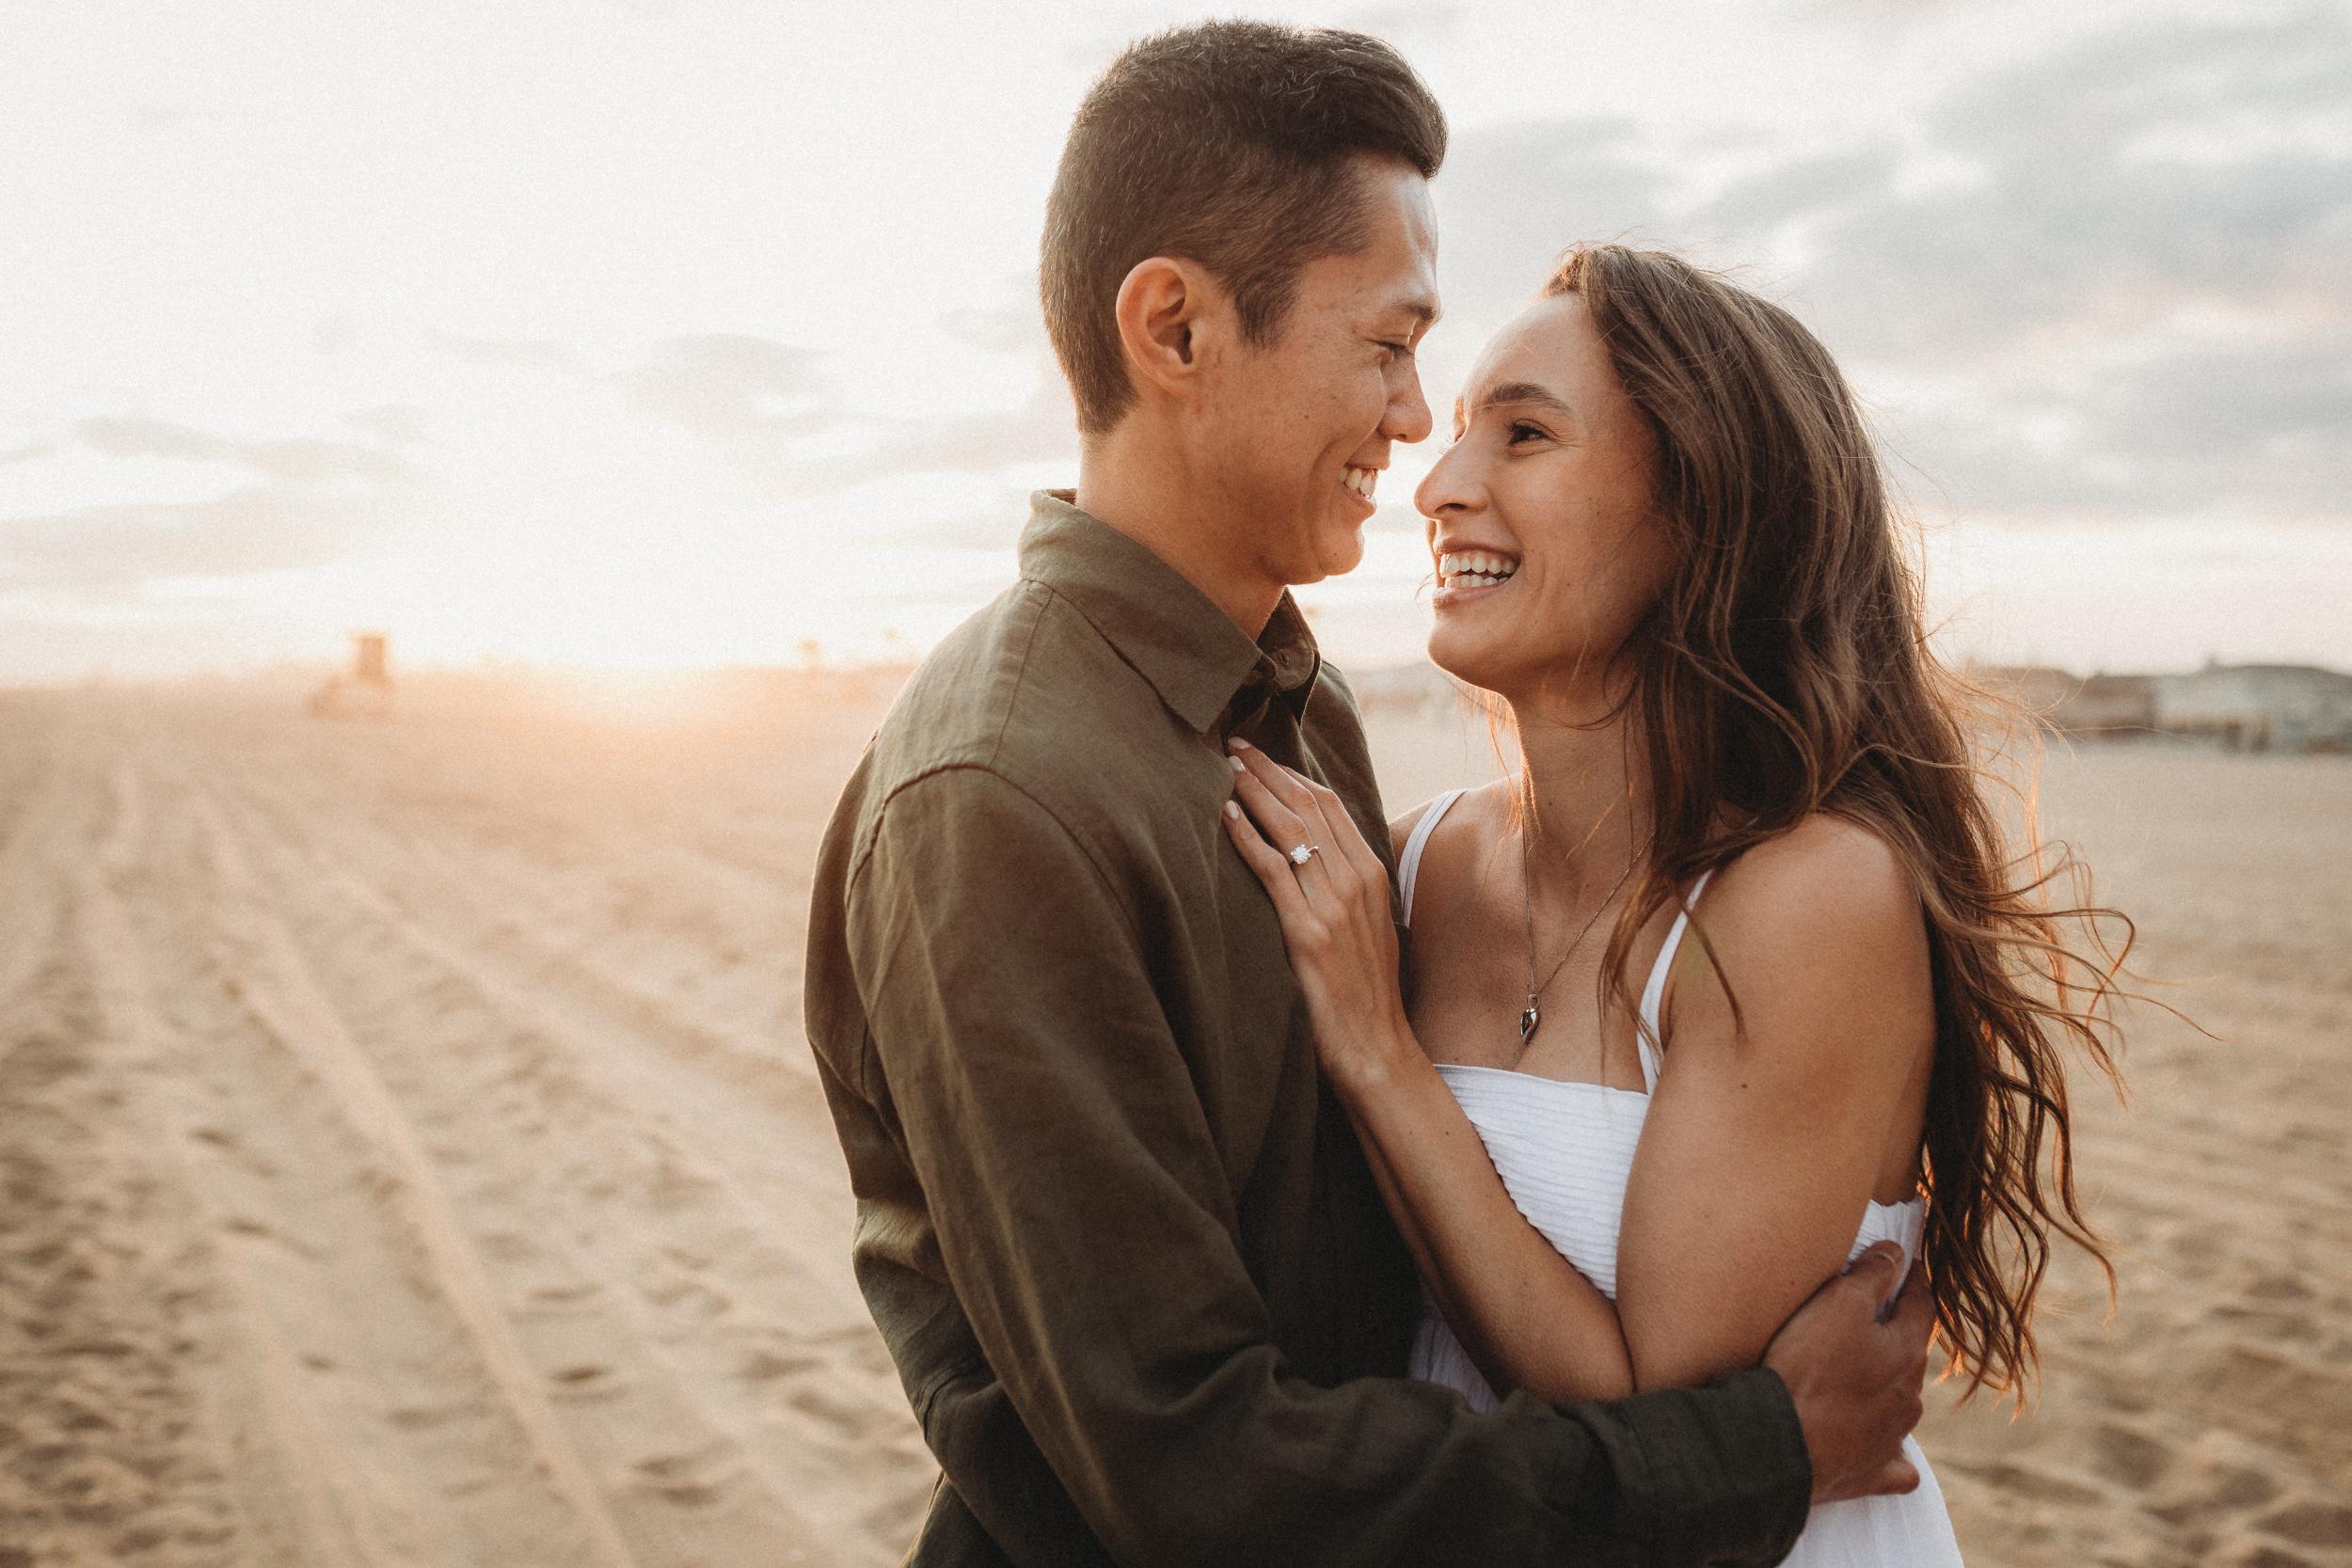 The Wedding Website of Cody Nguyen and Rianna Goins